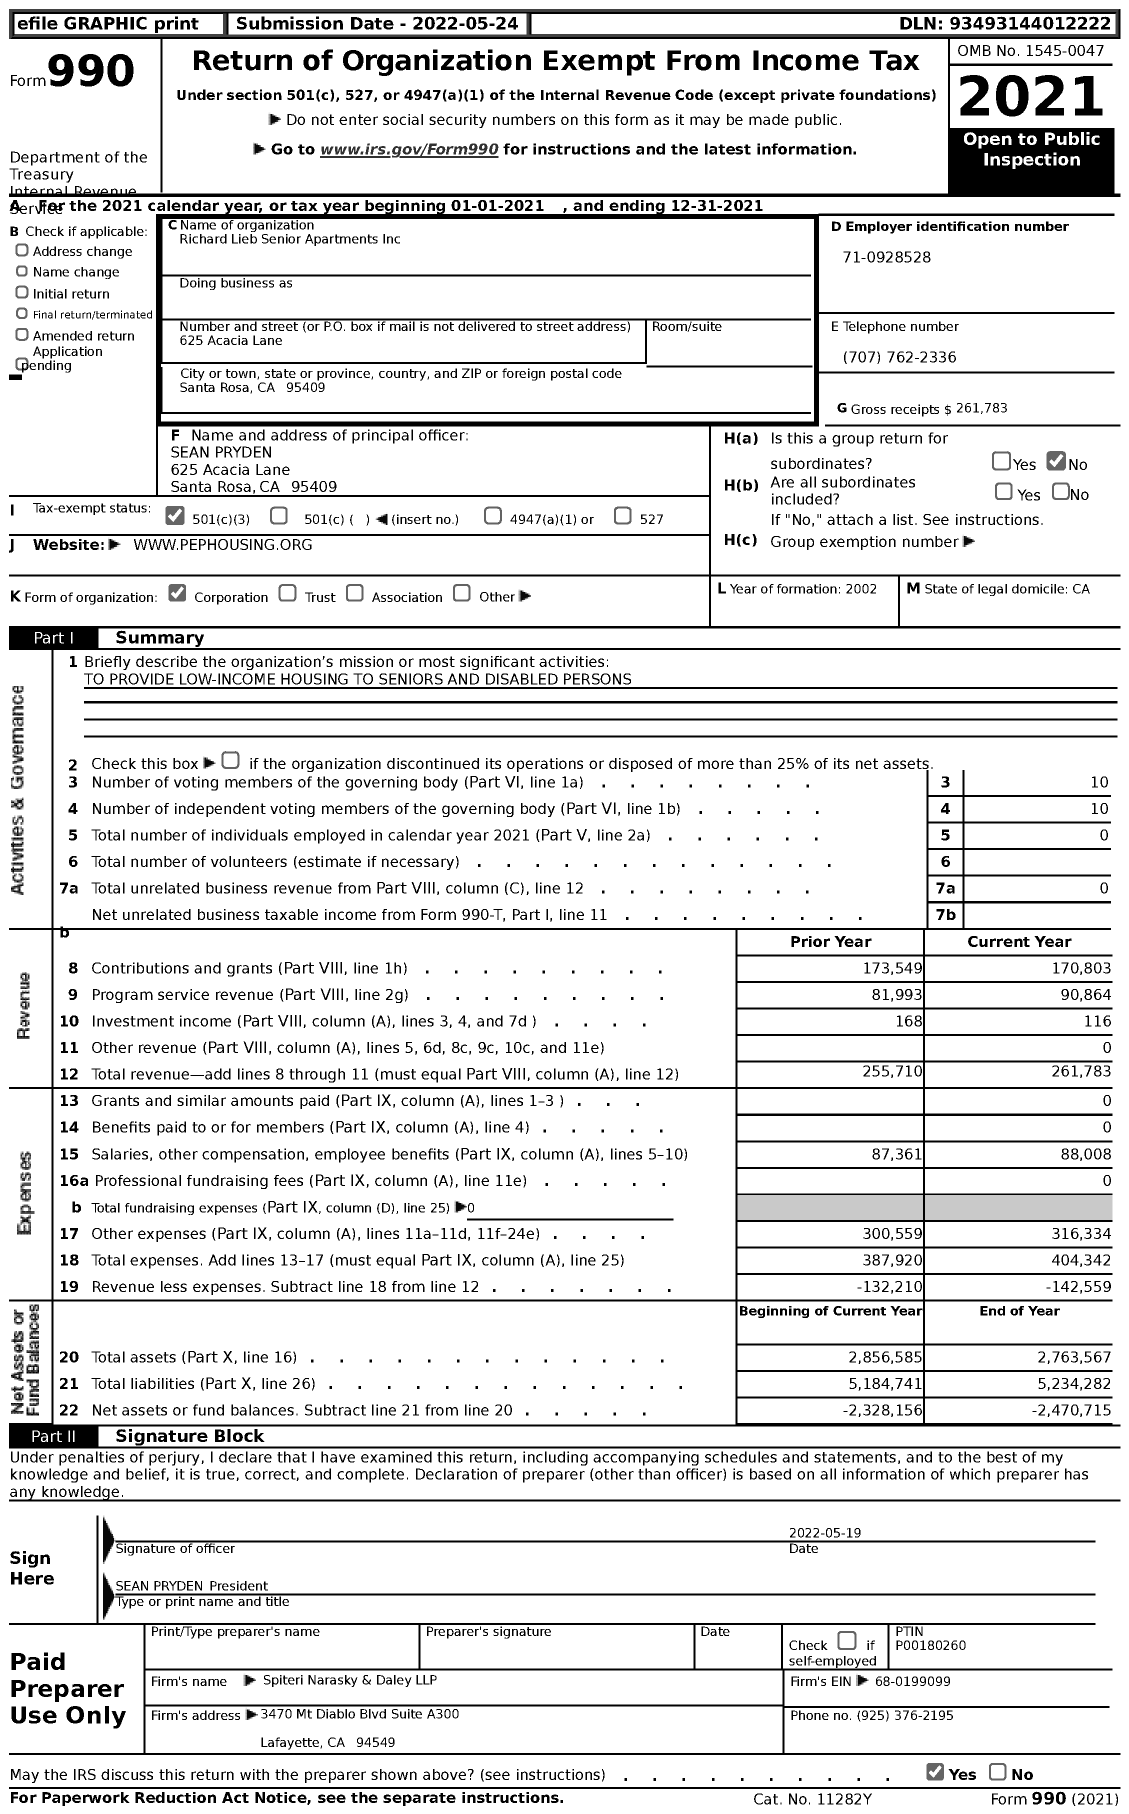 Image of first page of 2021 Form 990 for Richard Lieb Senior Apartments